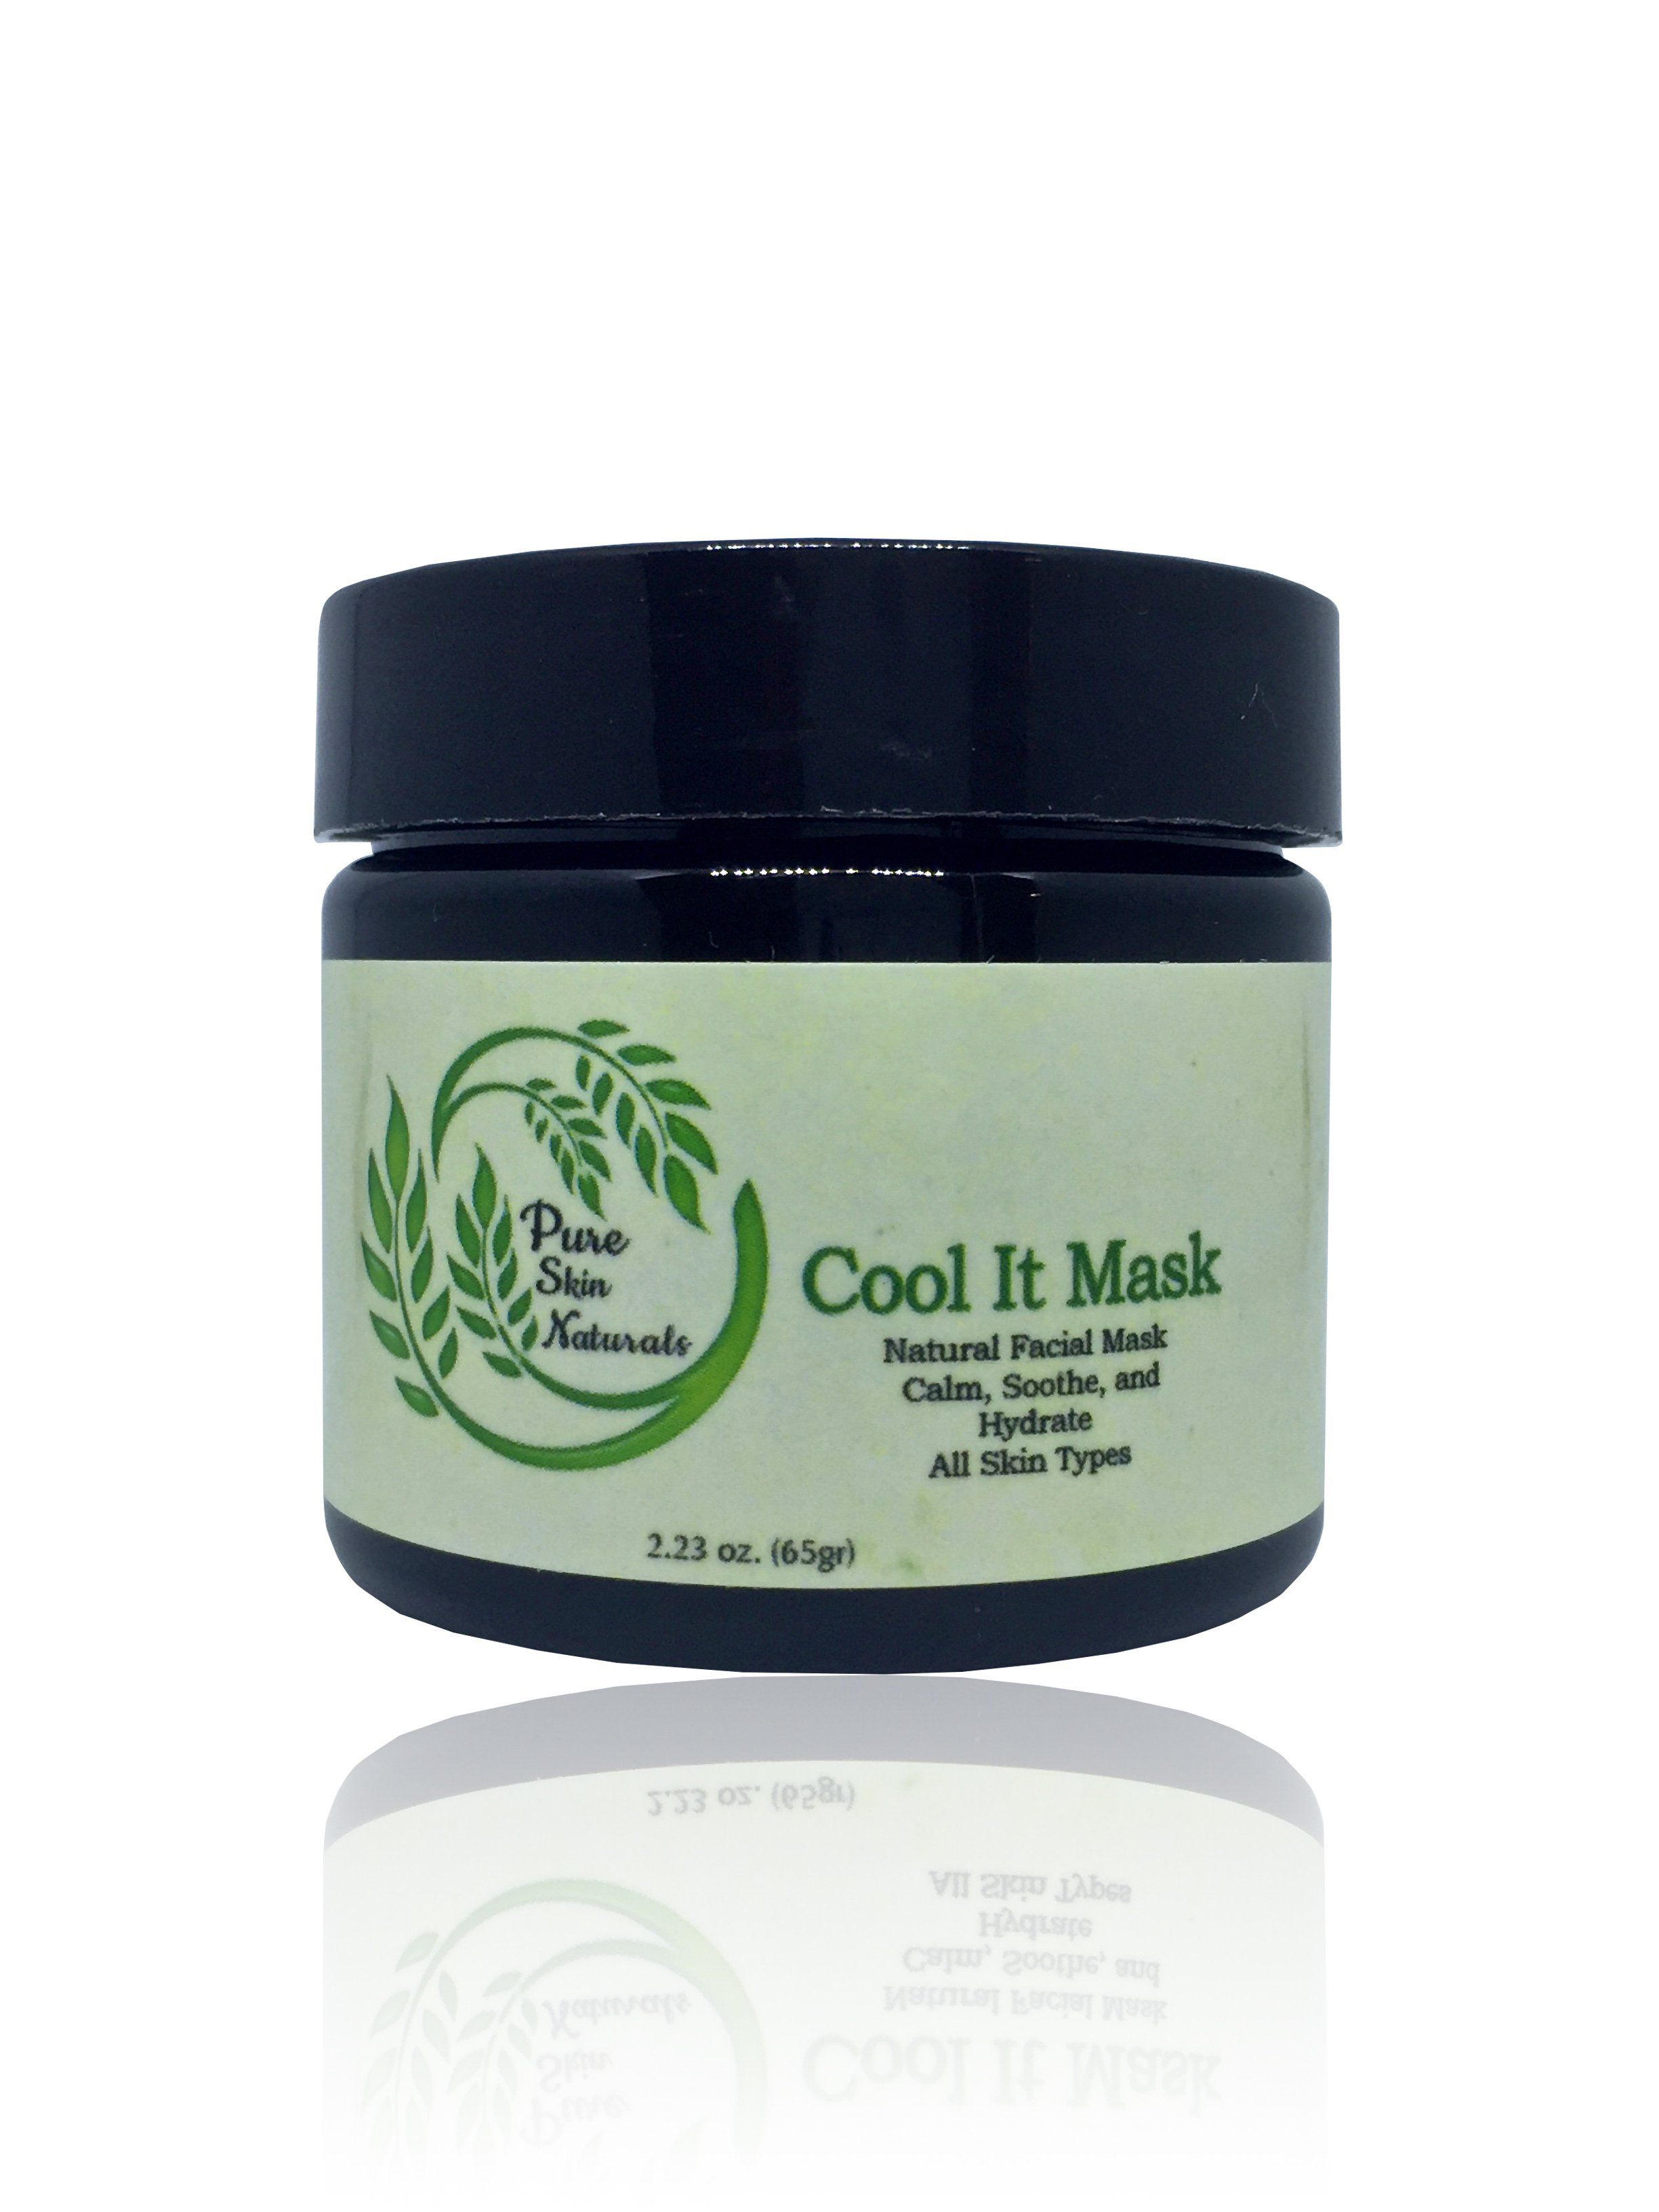 Cool It Mask is a natural mask to calm, soothe and hydrate for all skin types